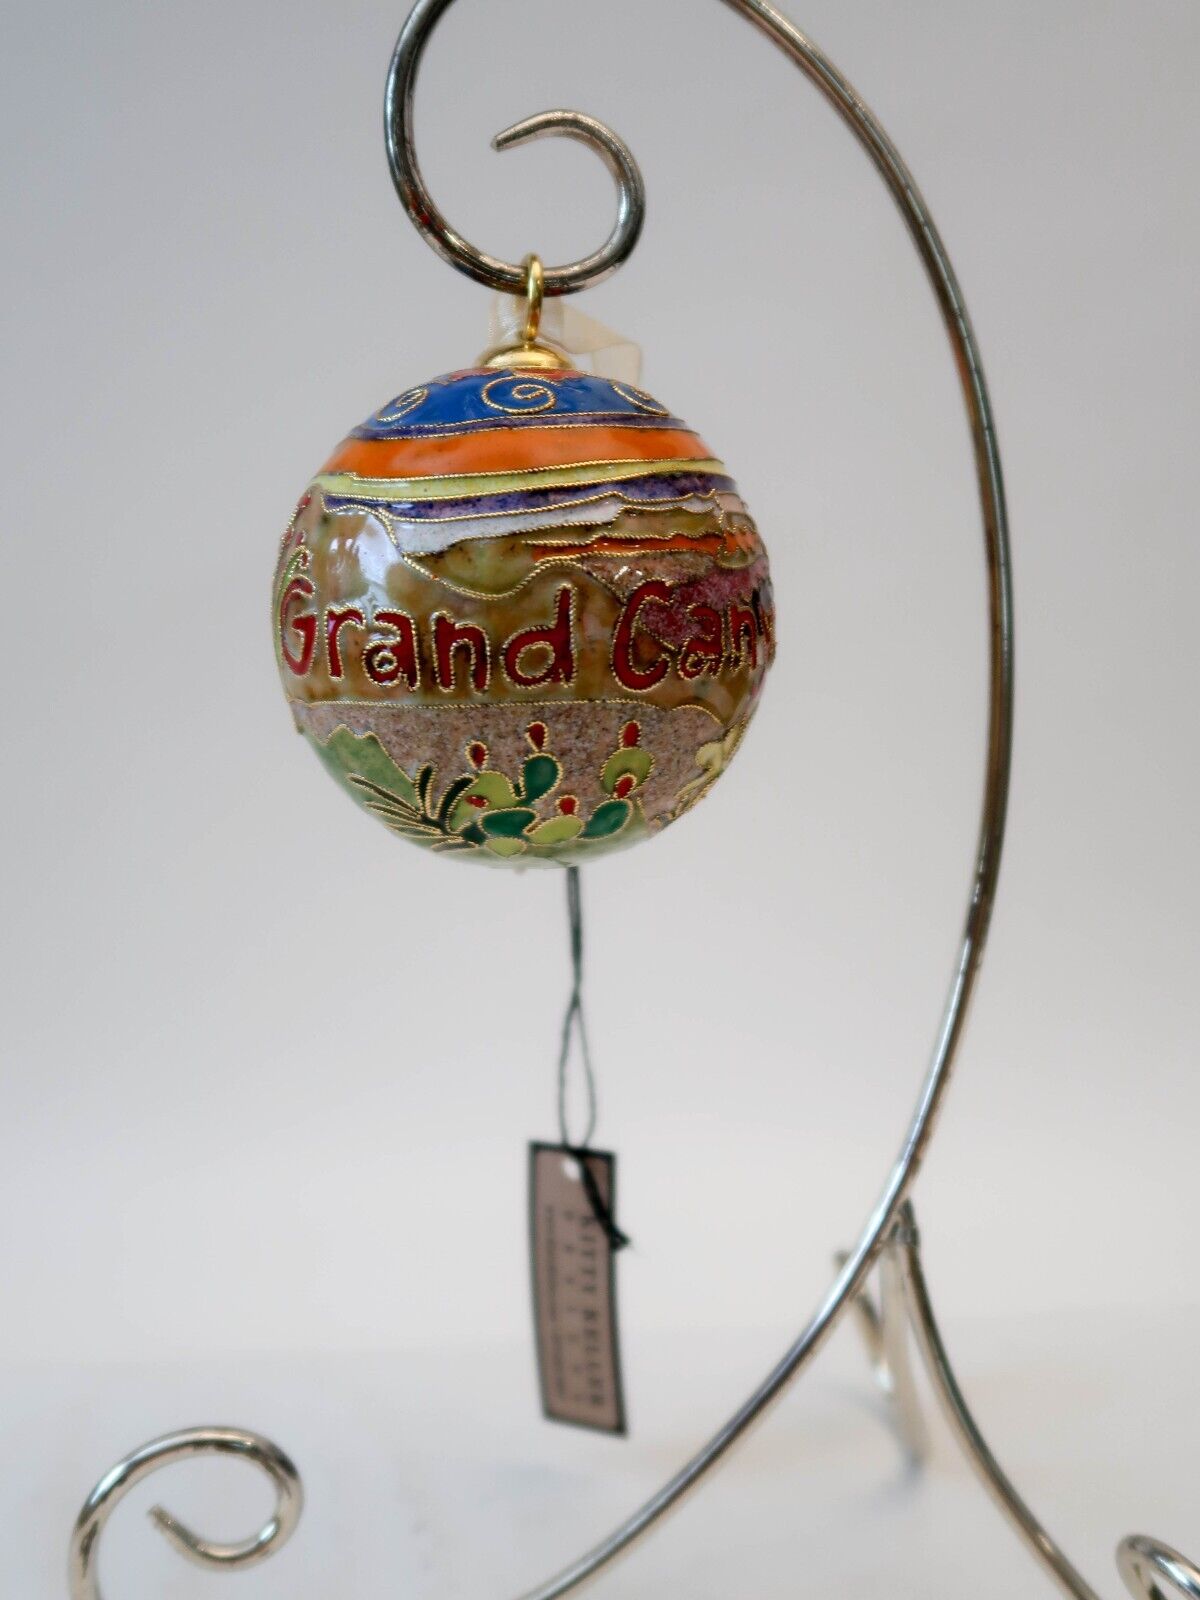 Vintage GRAND CANYON Christmas Ornament by Kitty Keller